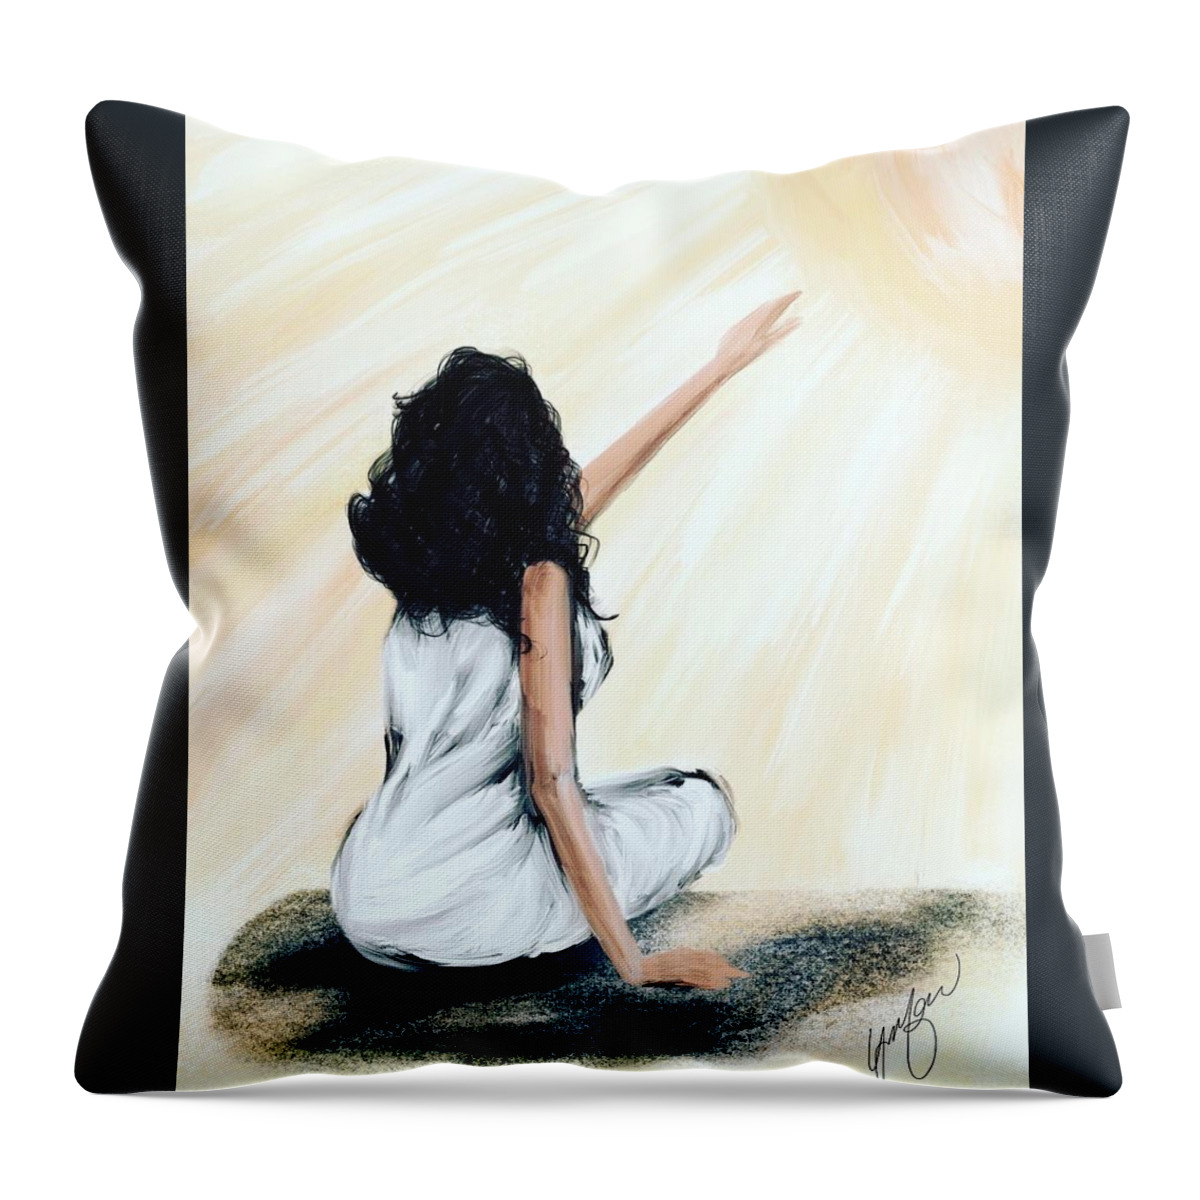 Inspirational Throw Pillow featuring the mixed media JOY comes in the morning by Yolanda Holmon